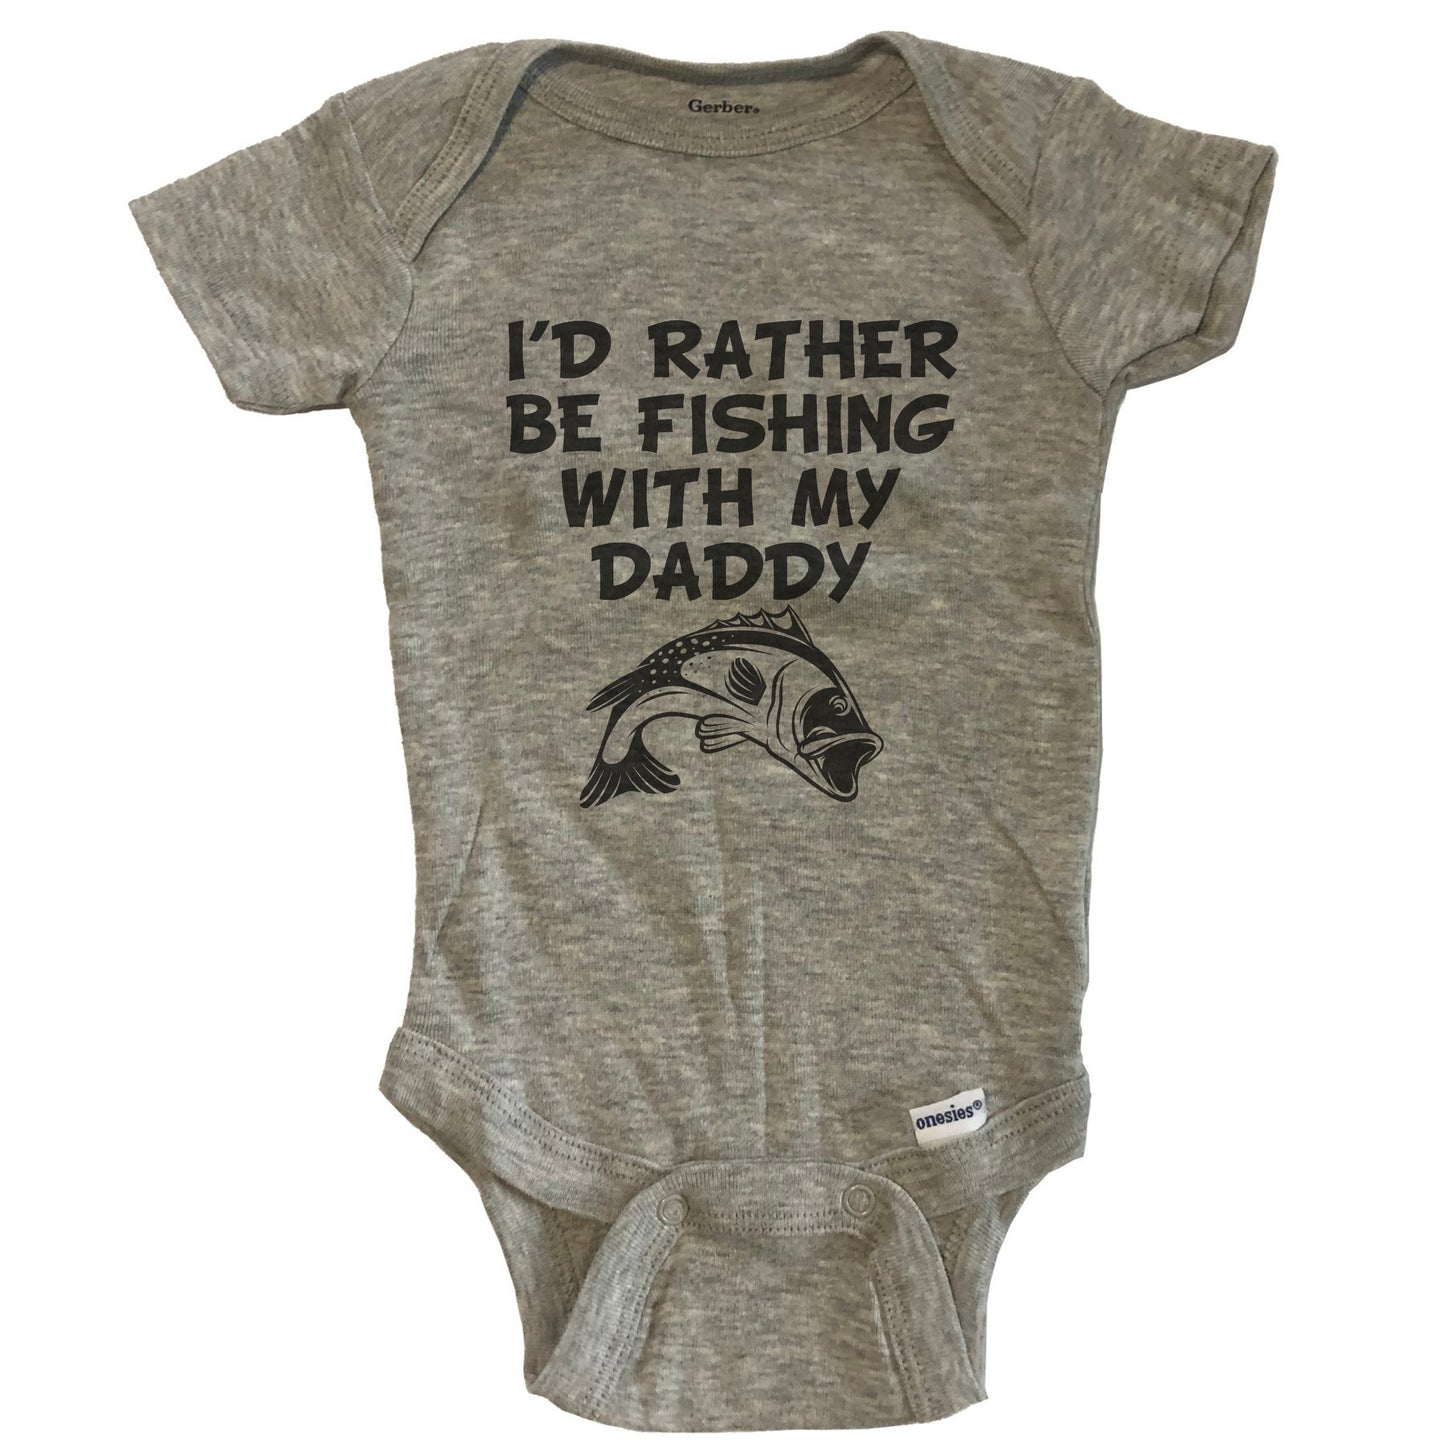 I'd Rather Be Fishing With My Daddy Funny Baby Onesie